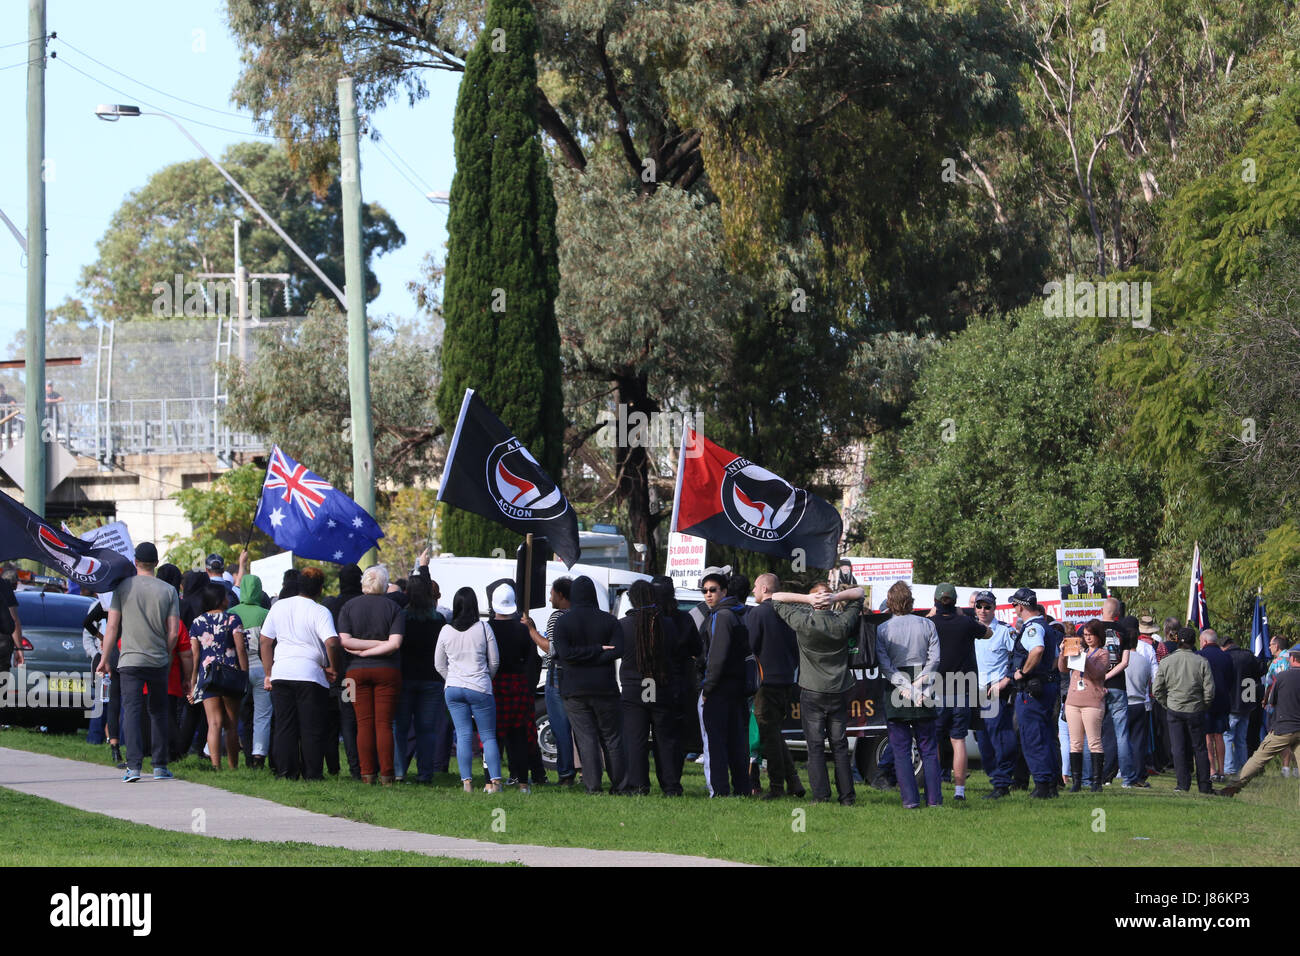 Sydney, Australia. 28 May 2017. Party for Freedom organised a protest in Penrith to the west of Sydney calling on the “treasonous Penrith Council, it’s Mayor John Thain and Councillors” to vote against the development application for an Islamic school to be built in the heart of Penrith. Counter protesters believed to be from a group calling themselves ‘Antifa’ or ‘anti-fascists’ also turned up. Credit: Richard Milnes/Alamy Live News Stock Photo